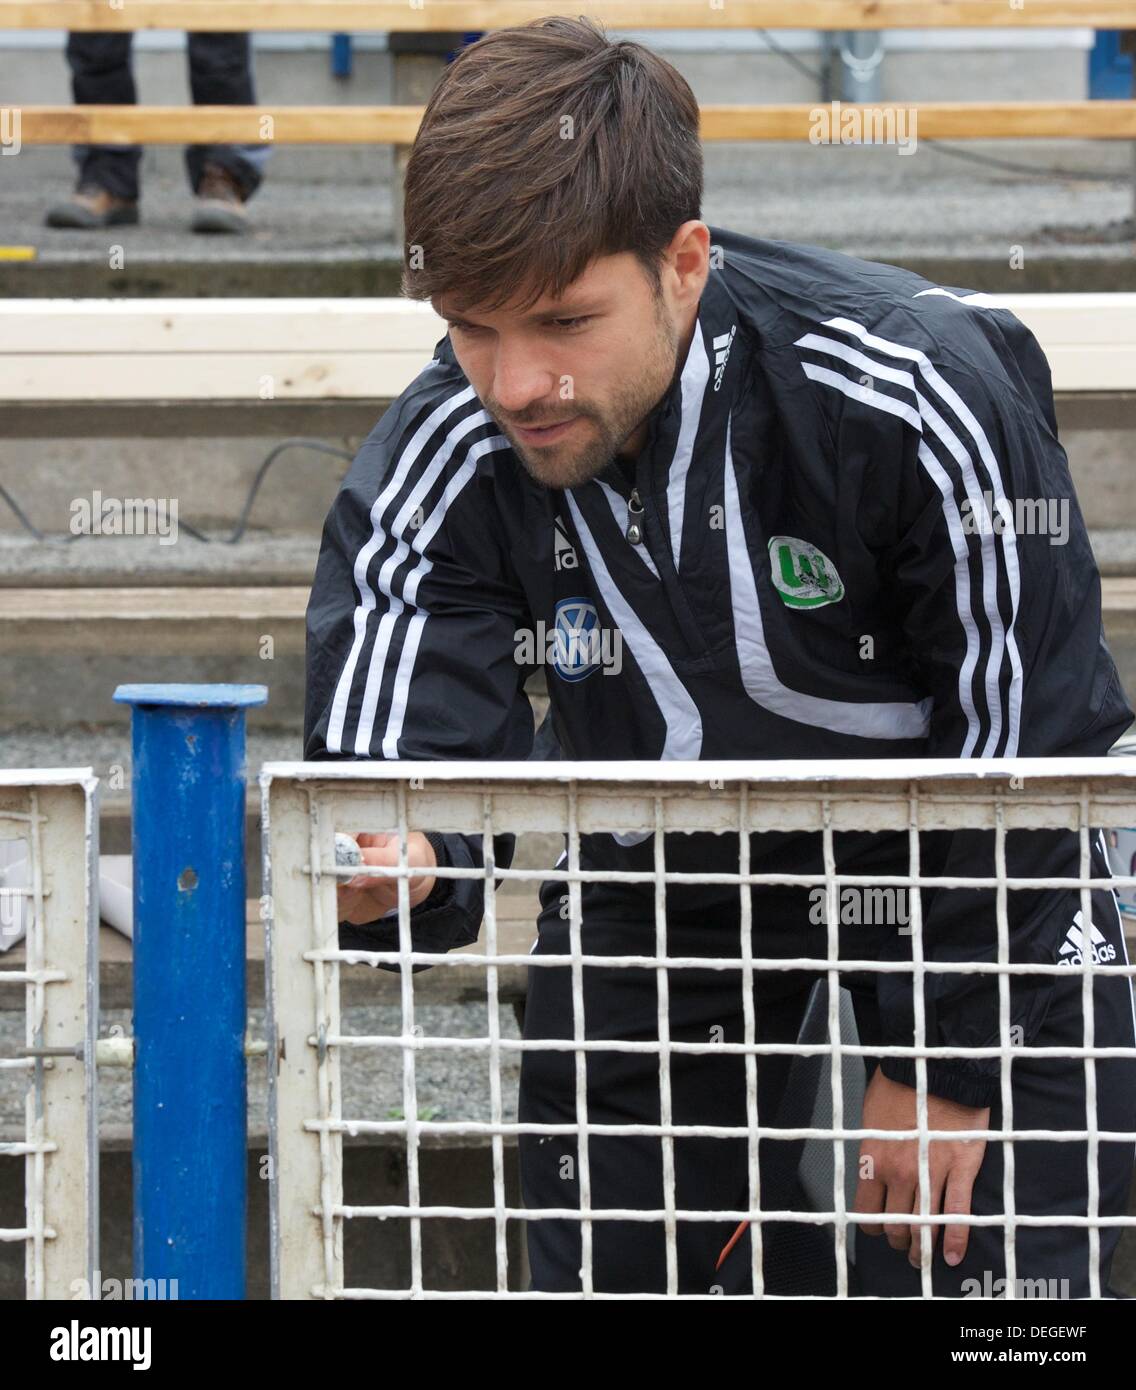 Diego Ribas da Cunha of VfL Wolfsburg paints the fence of the TSG Calbe Heger stadium in Calbe, Germany, 18 September 2013. Three months after floodwaters damaged the stadium VfL Wolfsburg helps the club from Calbe. Photo: PETER ENDING Stock Photo